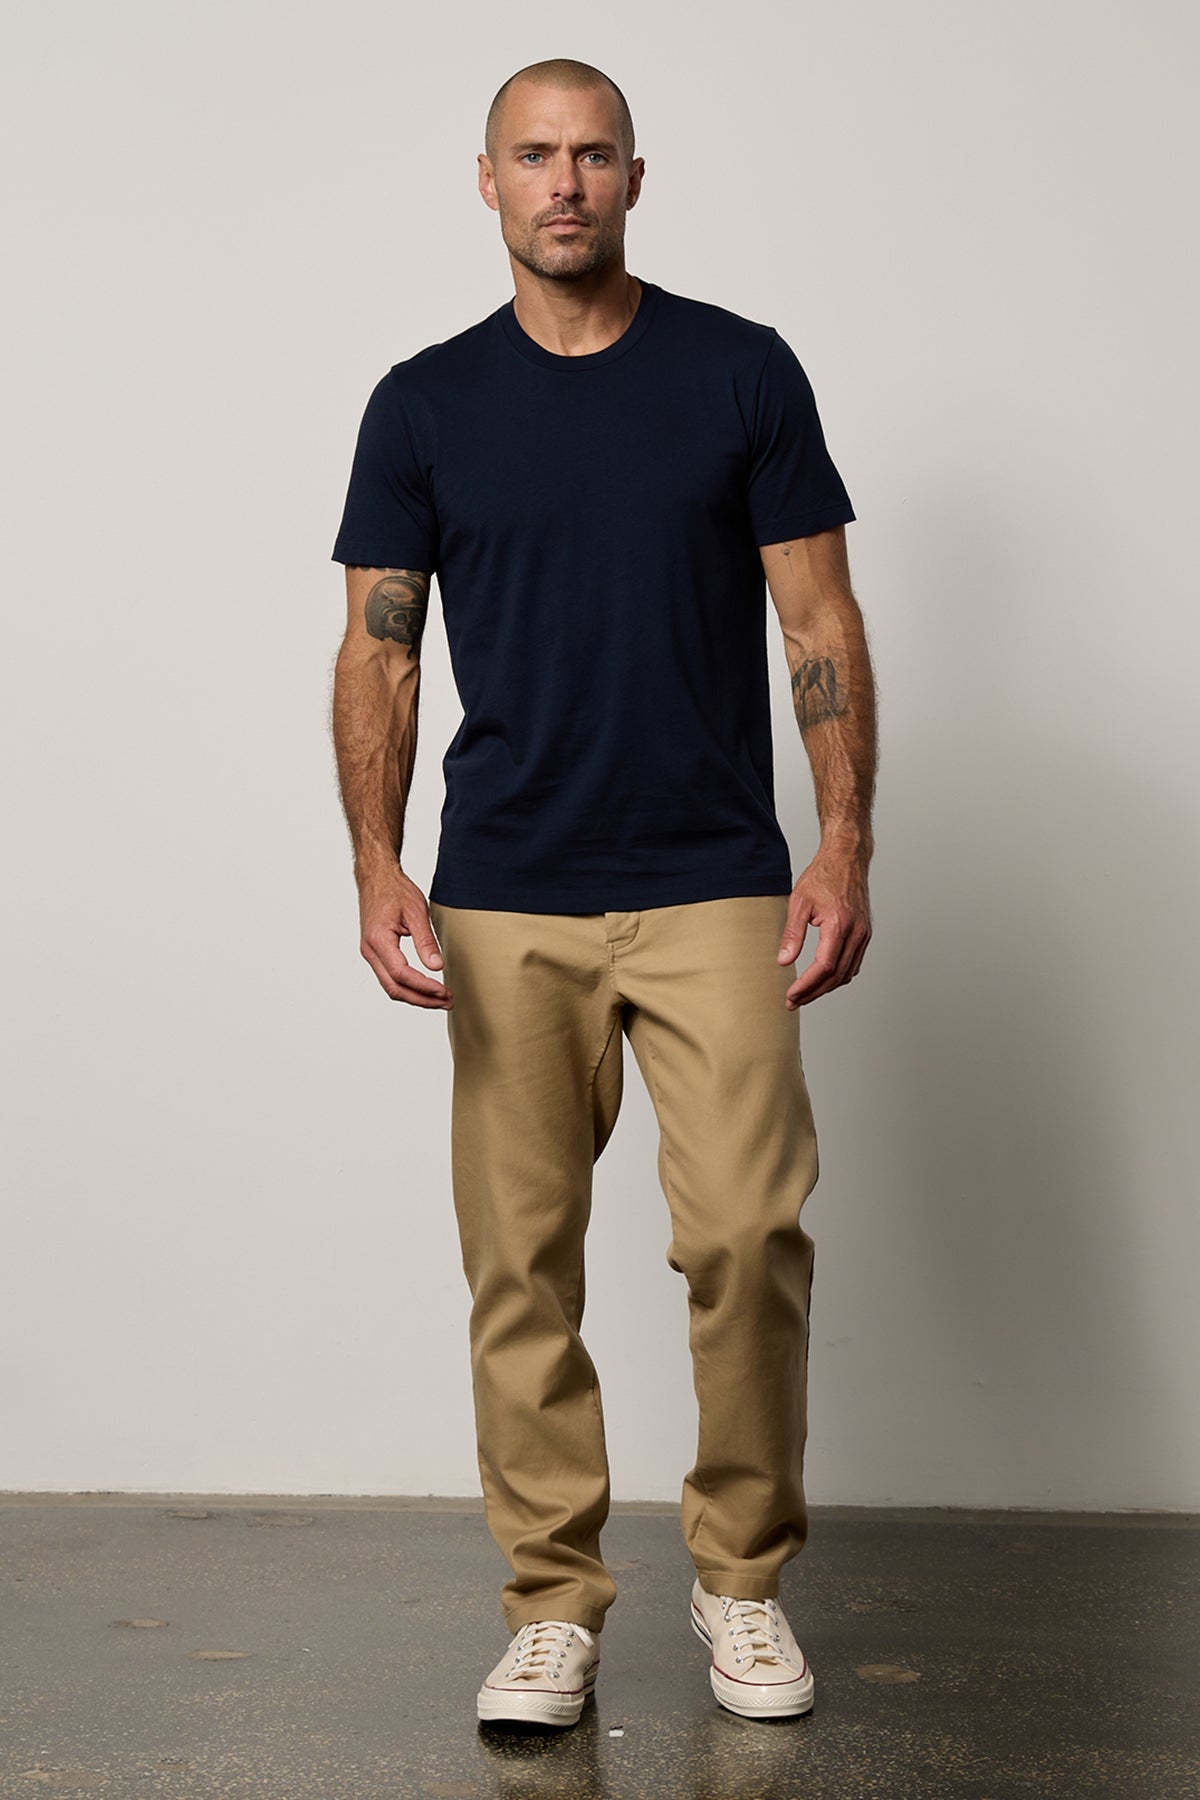 a man wearing a RANDY CREW NECK TEE by Velvet by Graham & Spencer and tan pants.-35755370610881